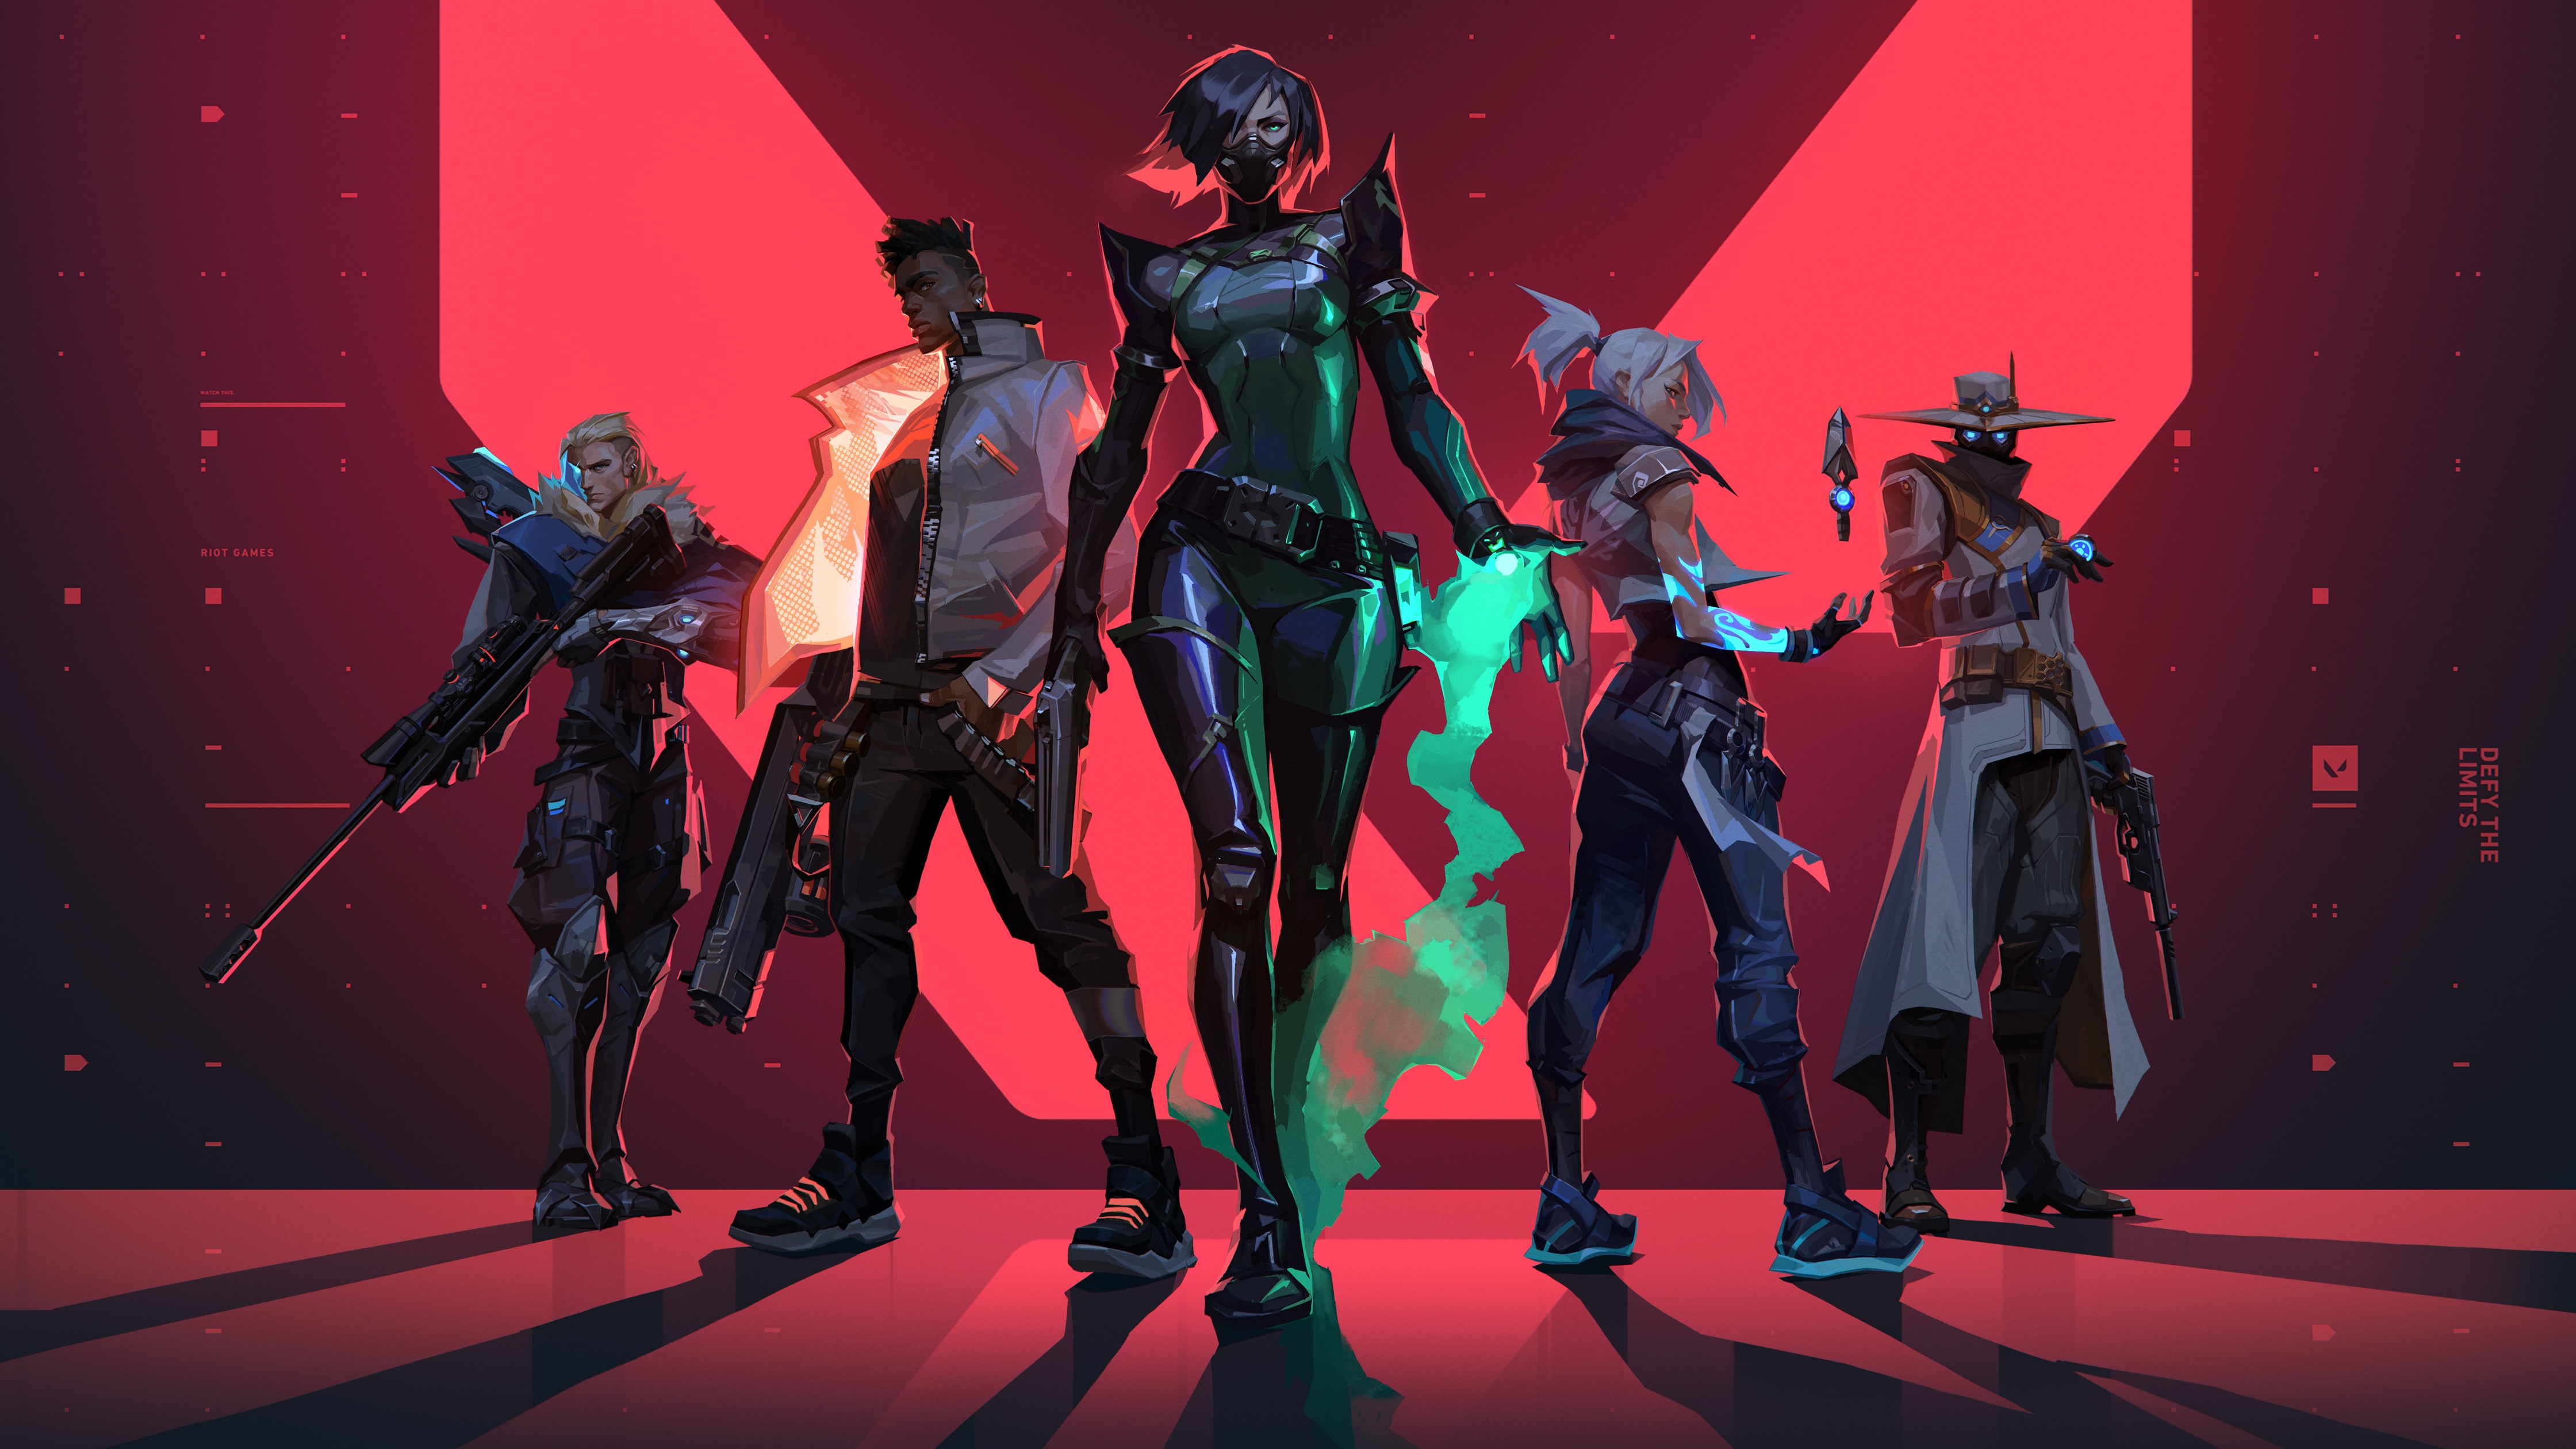 Official artwork of Valorant showing the game's characters in a row